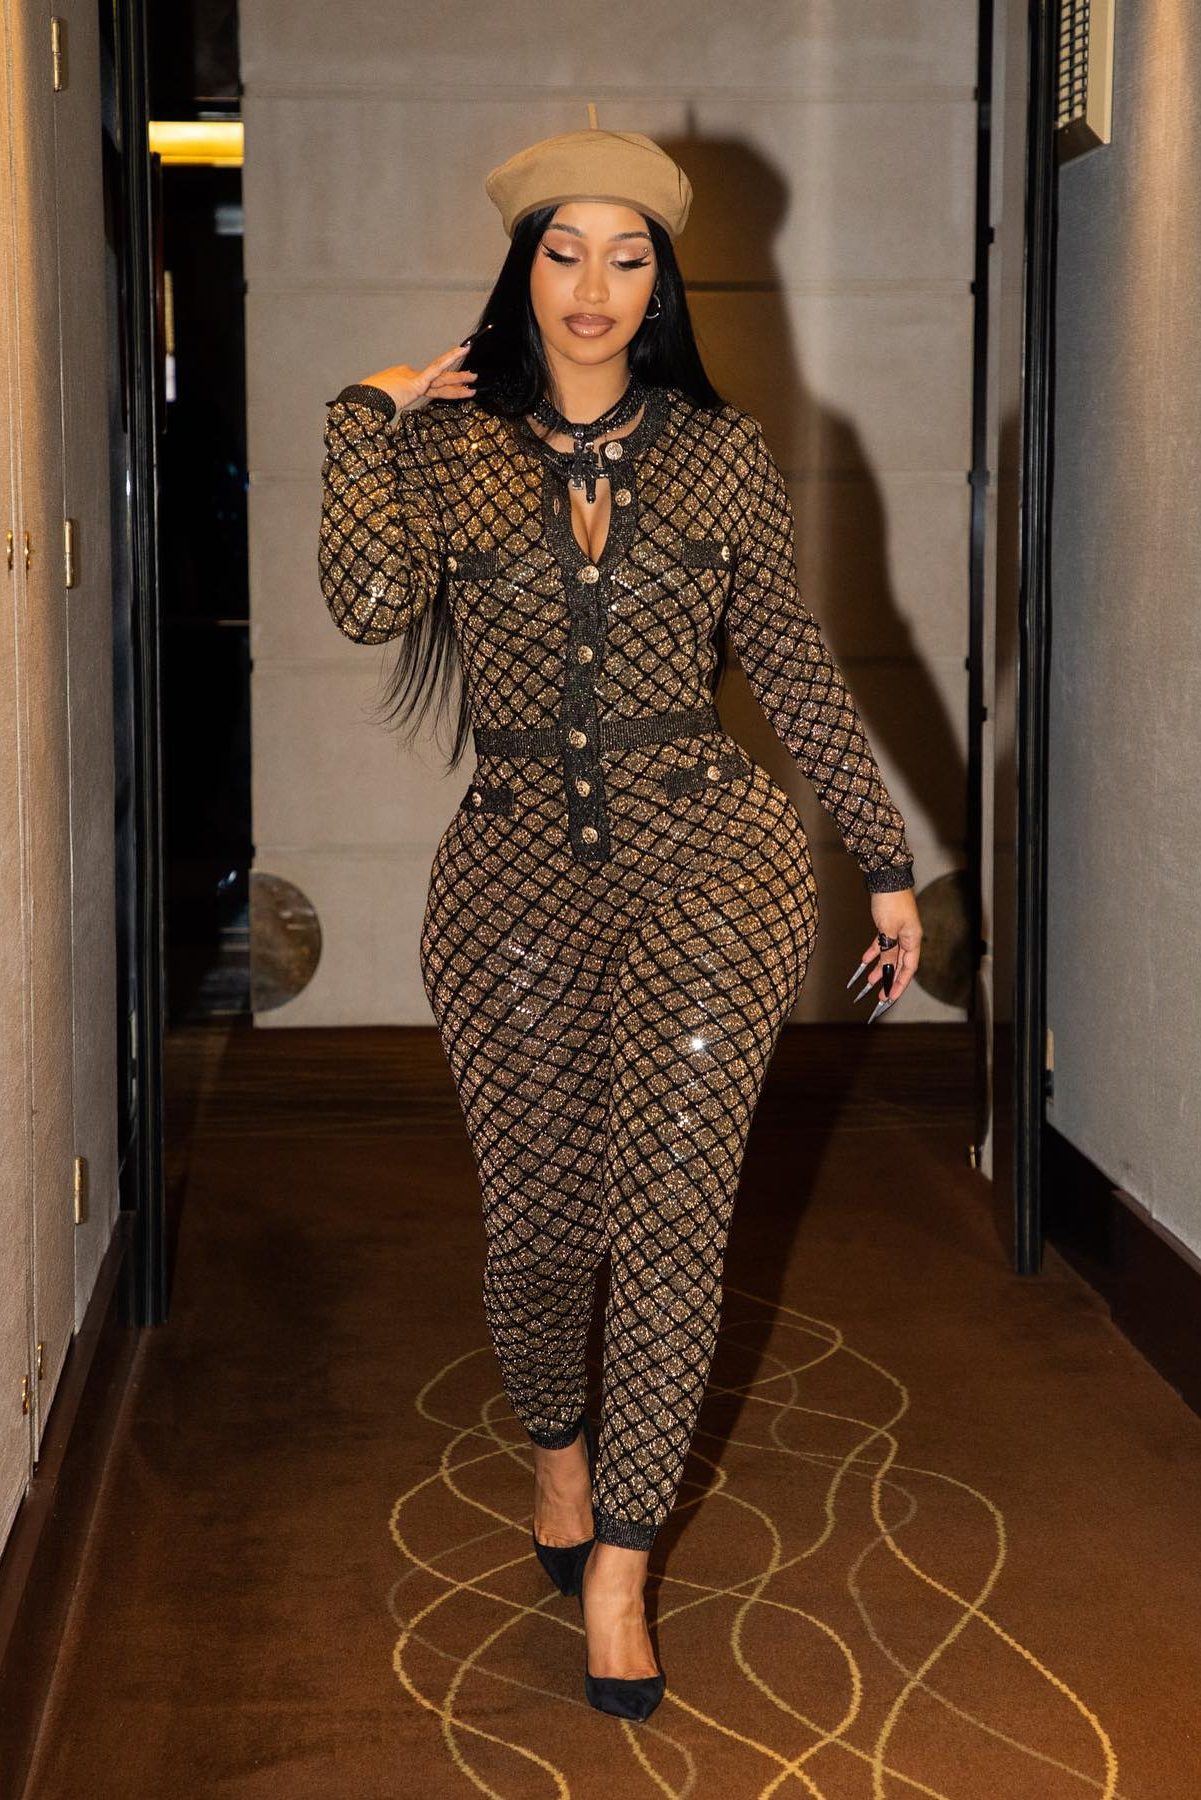 Cardi B's Insane Chanel Community Service Outfits: Fitwatch